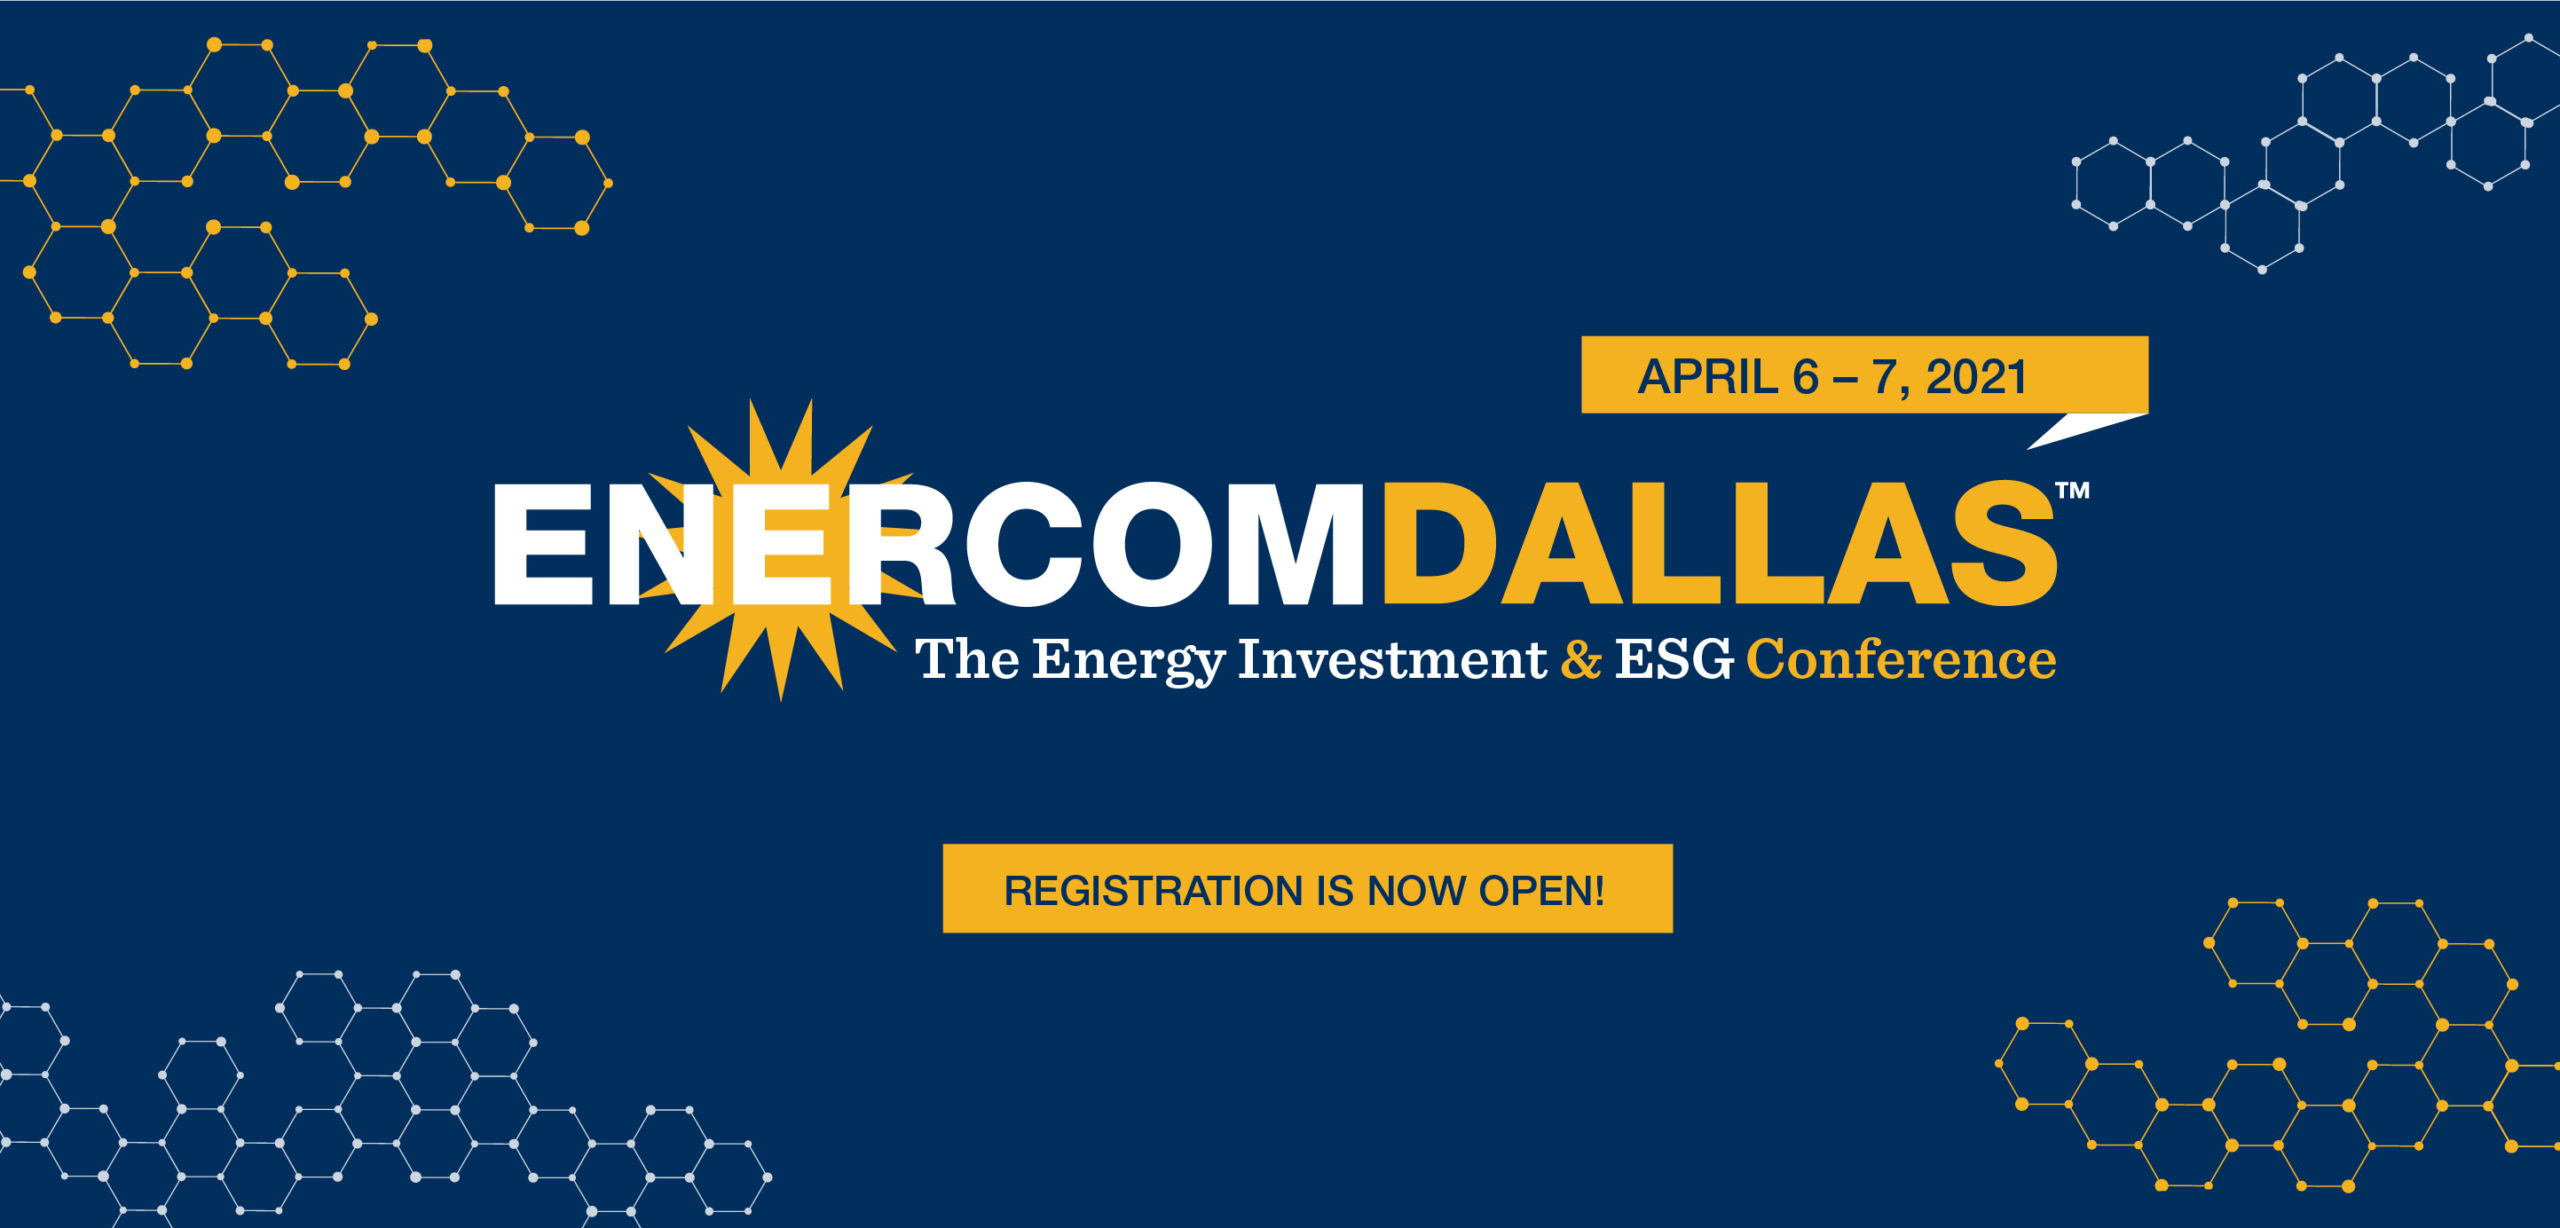 In person and virtual registration is Open for EnerCom Dallas The Energy Investment and ESG Conference, April 6-7, 2021- oil and gas 360